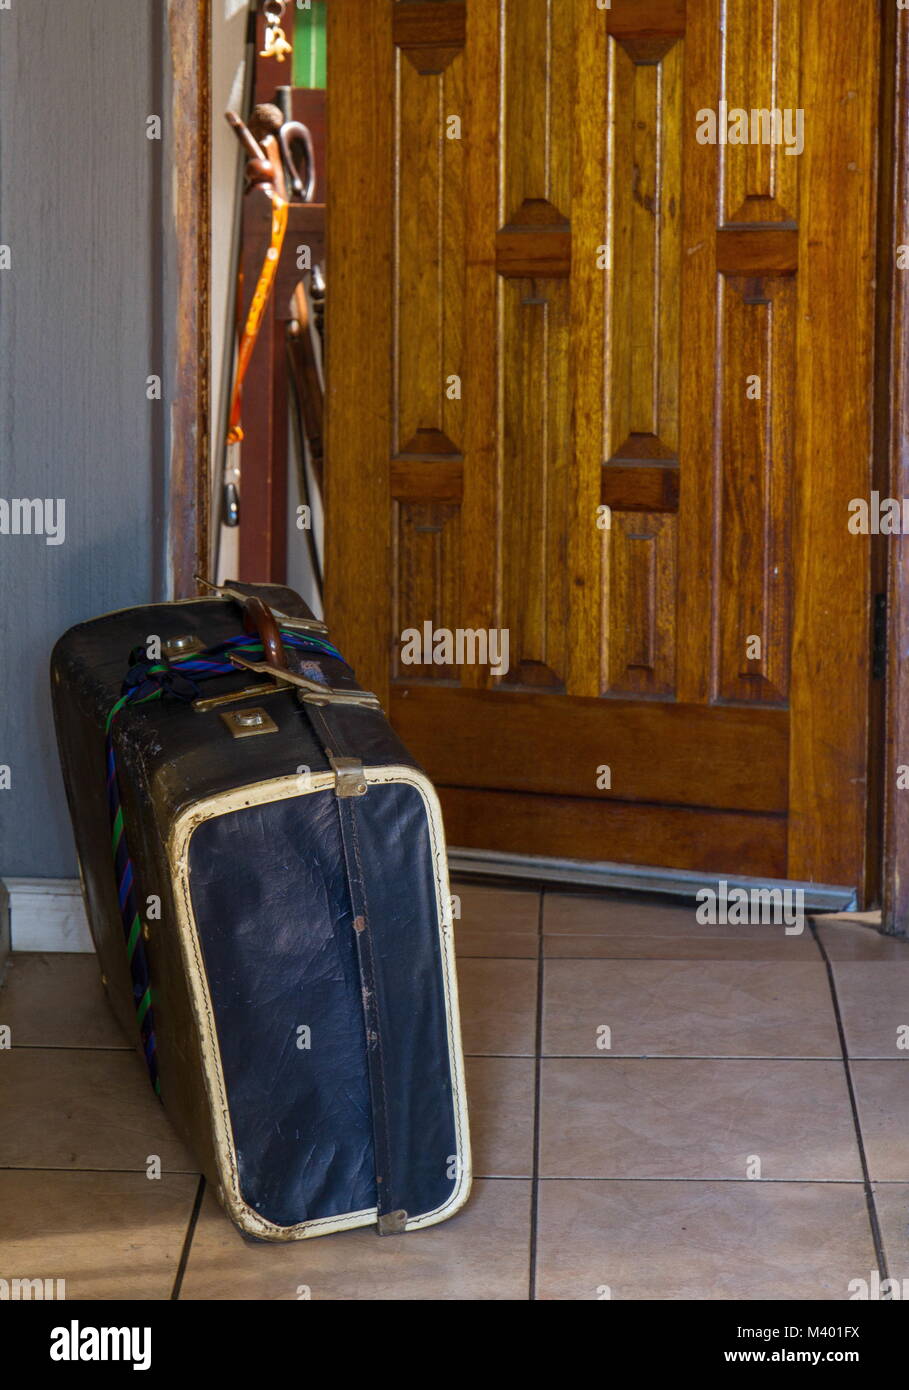 Person kicked out door Stock Photo by ©orlaimagen 62066085